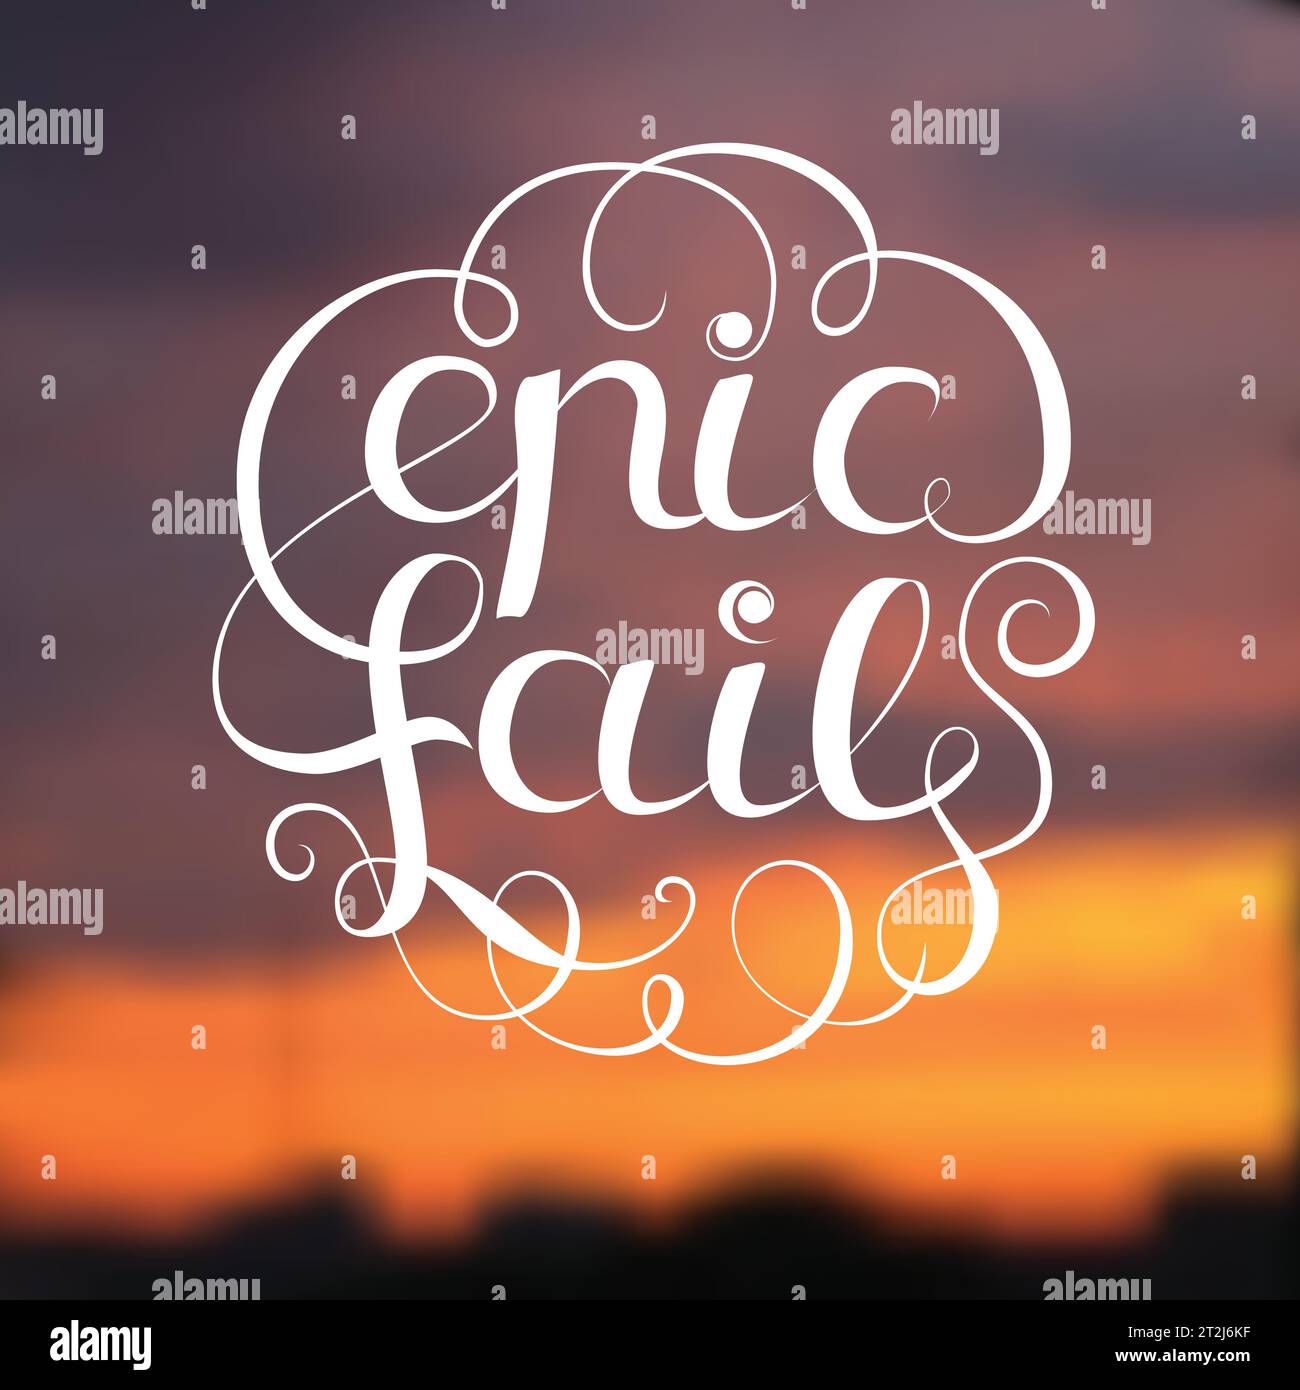 Epic fail design with title on blurred background flat vector ...